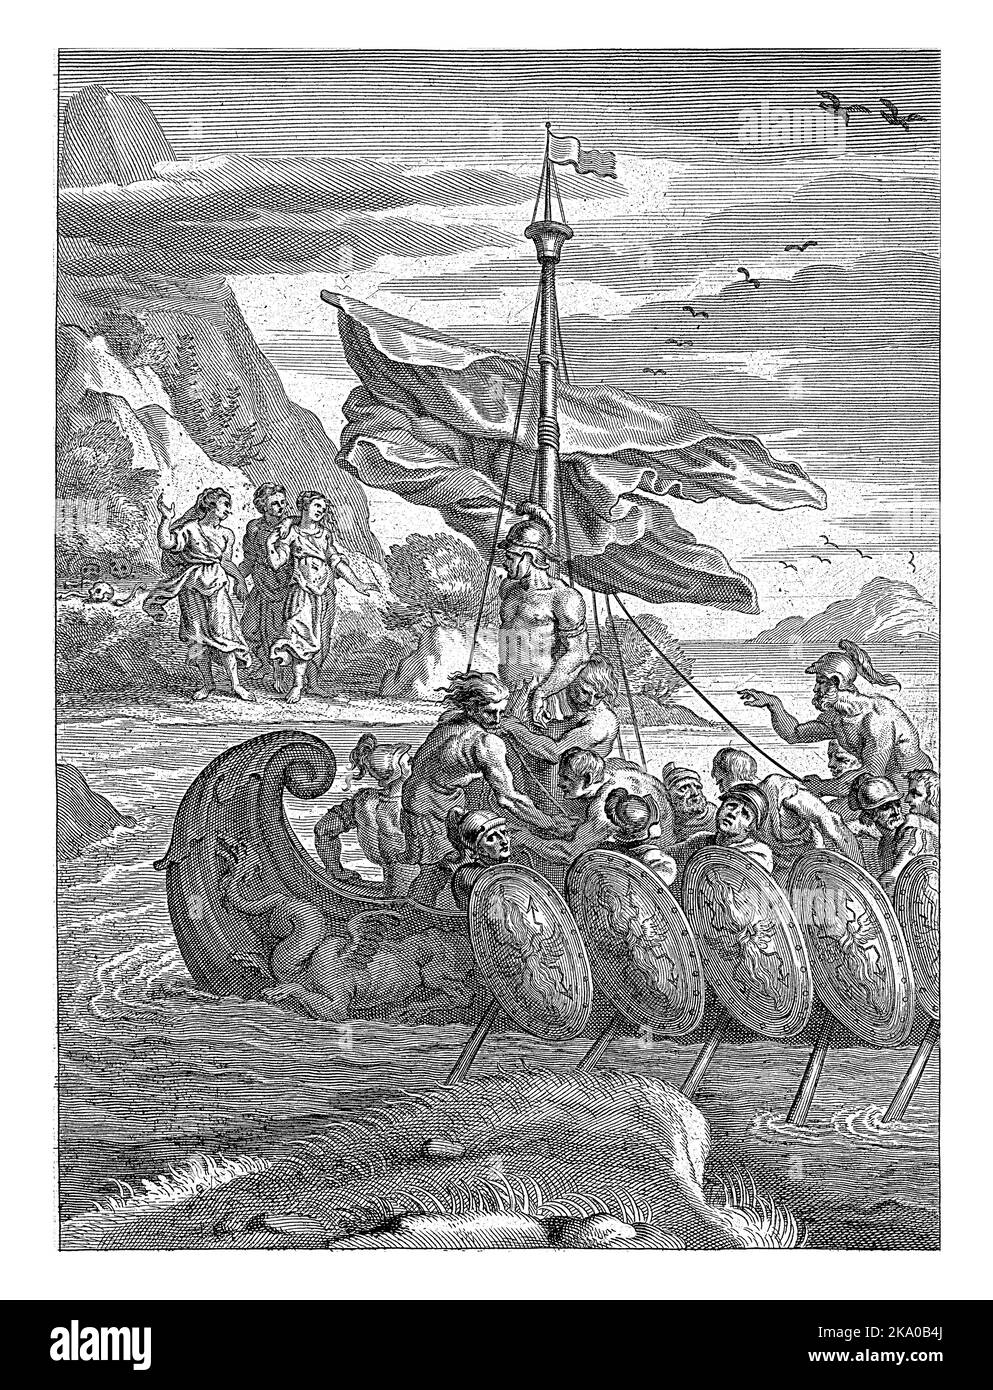 Odysseus is tied to the ship's mast by his men to resist the sirens' song. The rest of the men row. There are three sirens on the shore. Behind them l Stock Photo